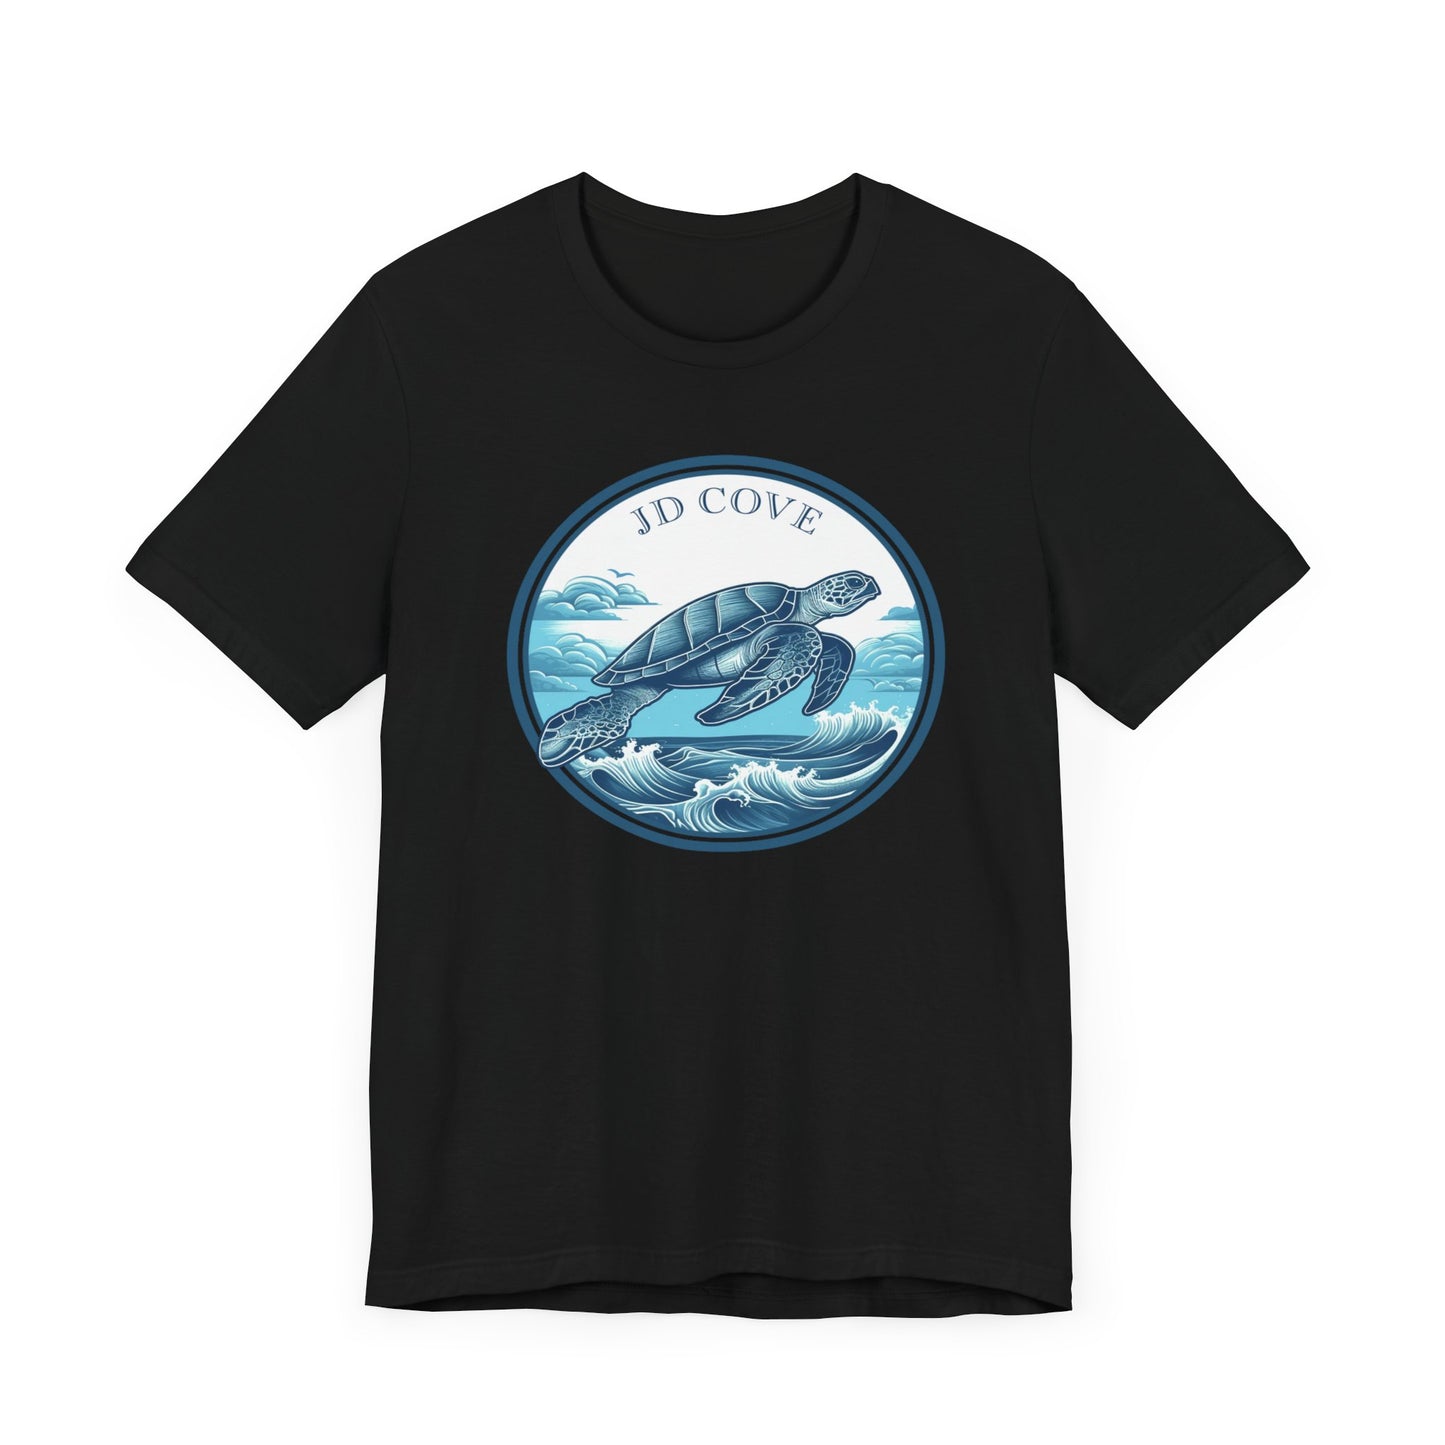 Turtle Ocean JD Cove Waves Graphic Tee - Unisex Eco-Friendly Cotton Shirt